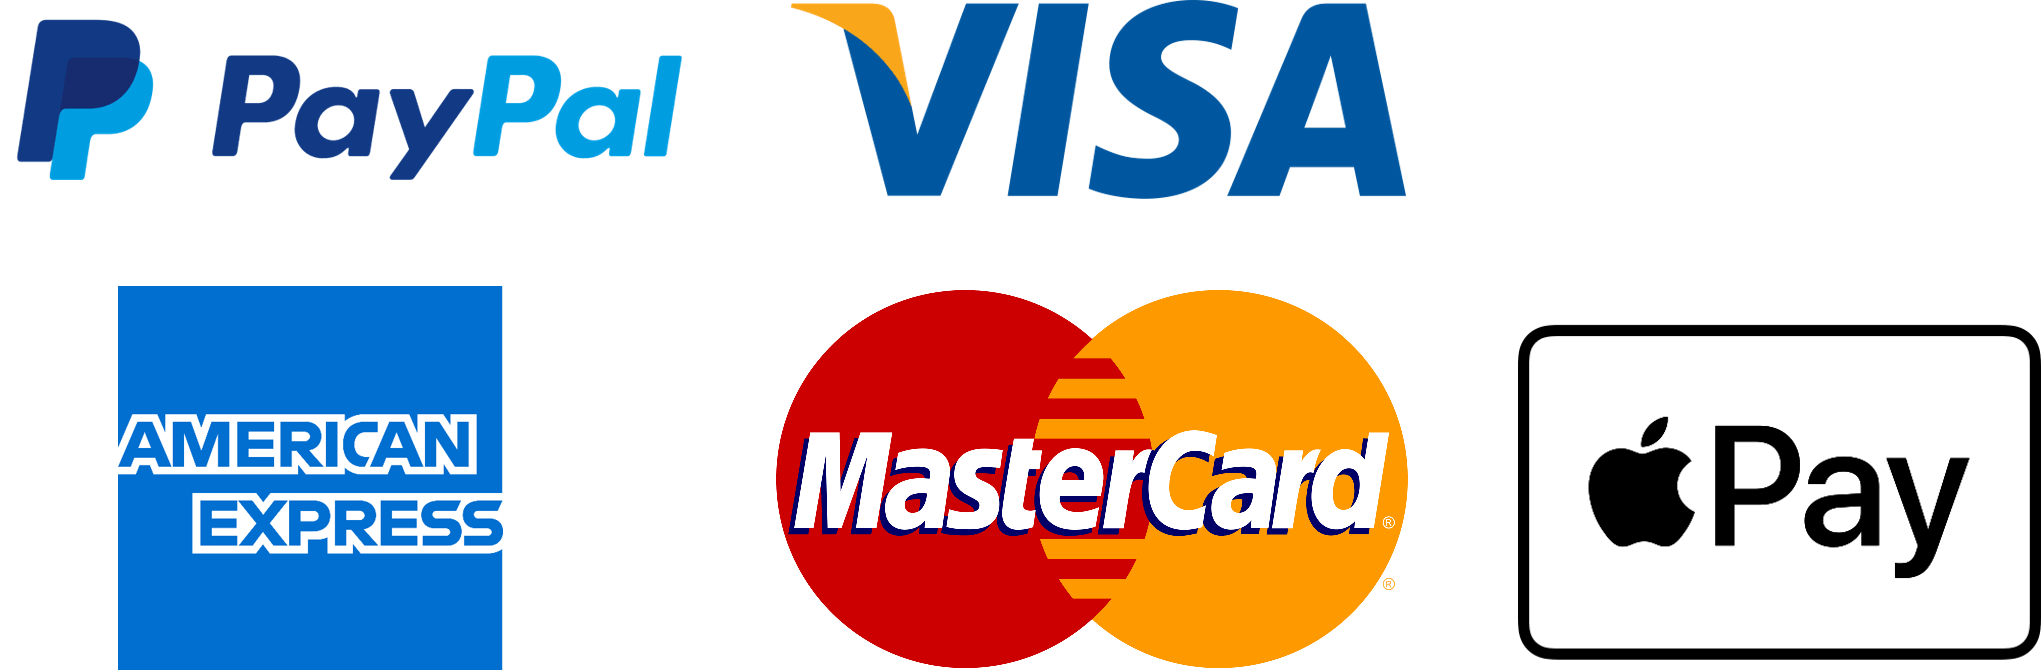 Payment options are Paypal, Visa, American Express, MasterCard, and Apple Pay